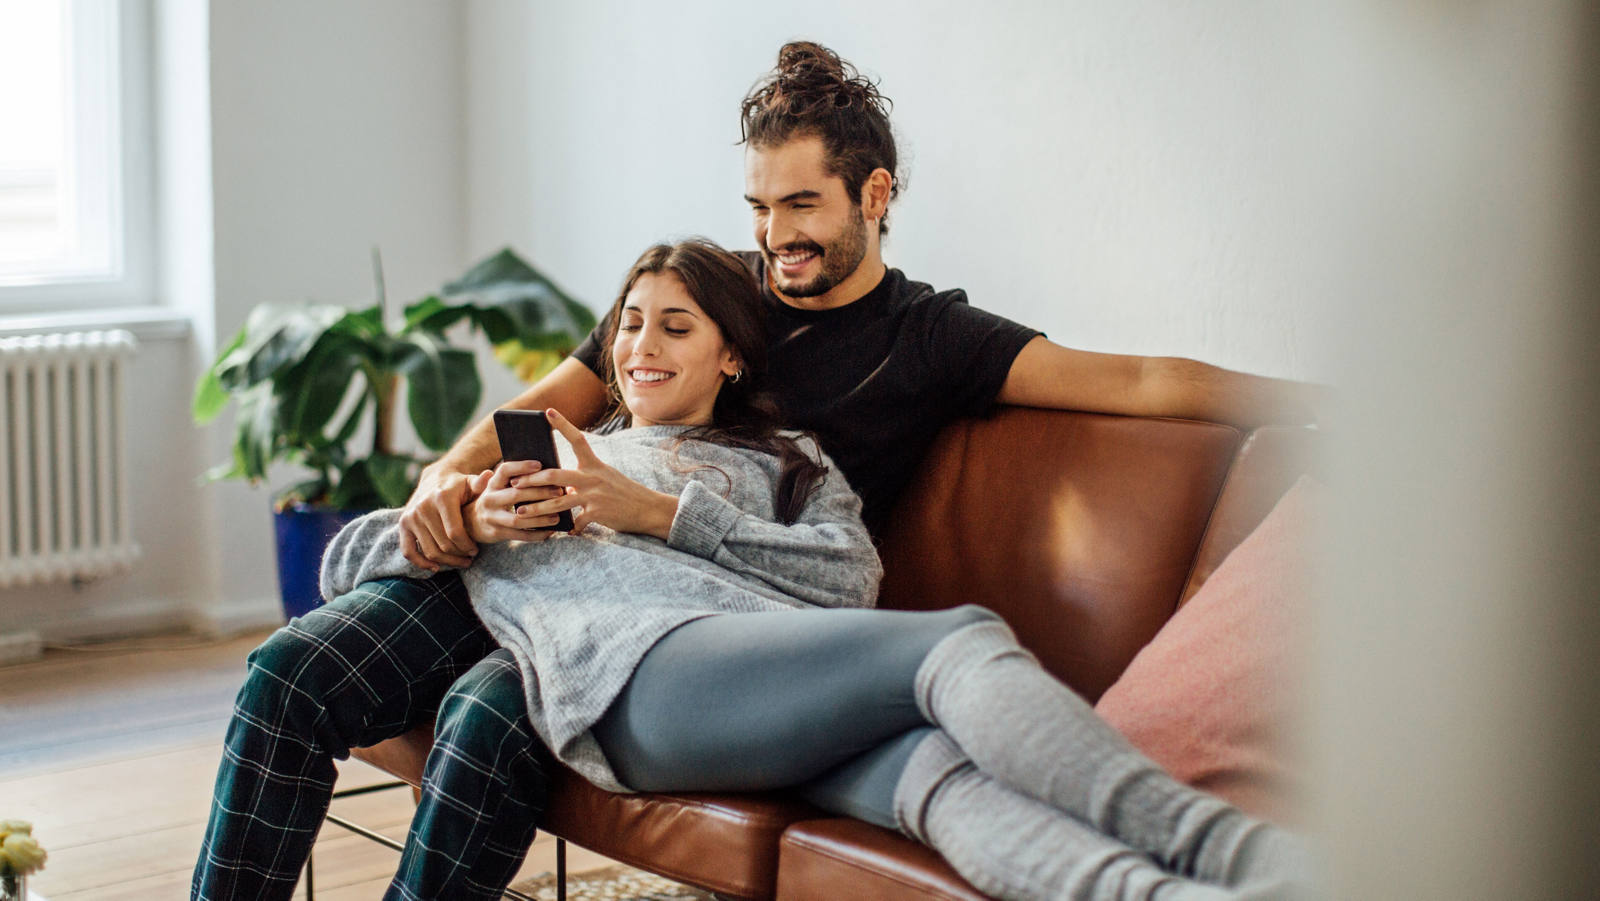 A young couple is sitting on the sofa and looking happily in their smartphone.